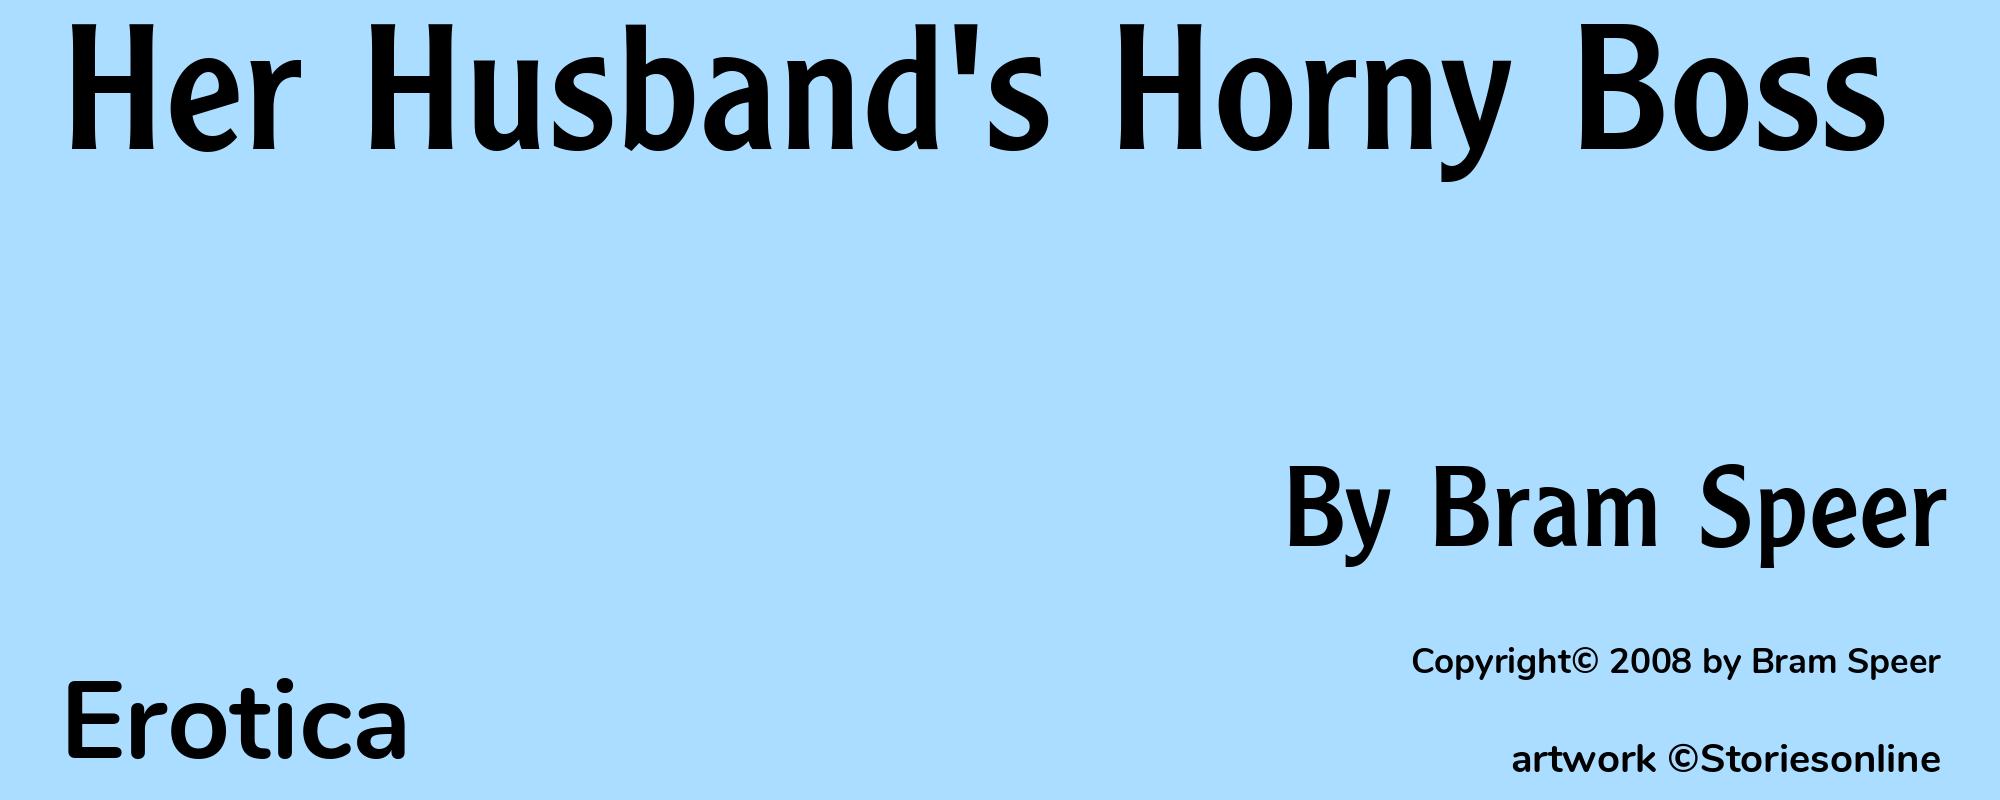 Her Husband's Horny Boss - Cover